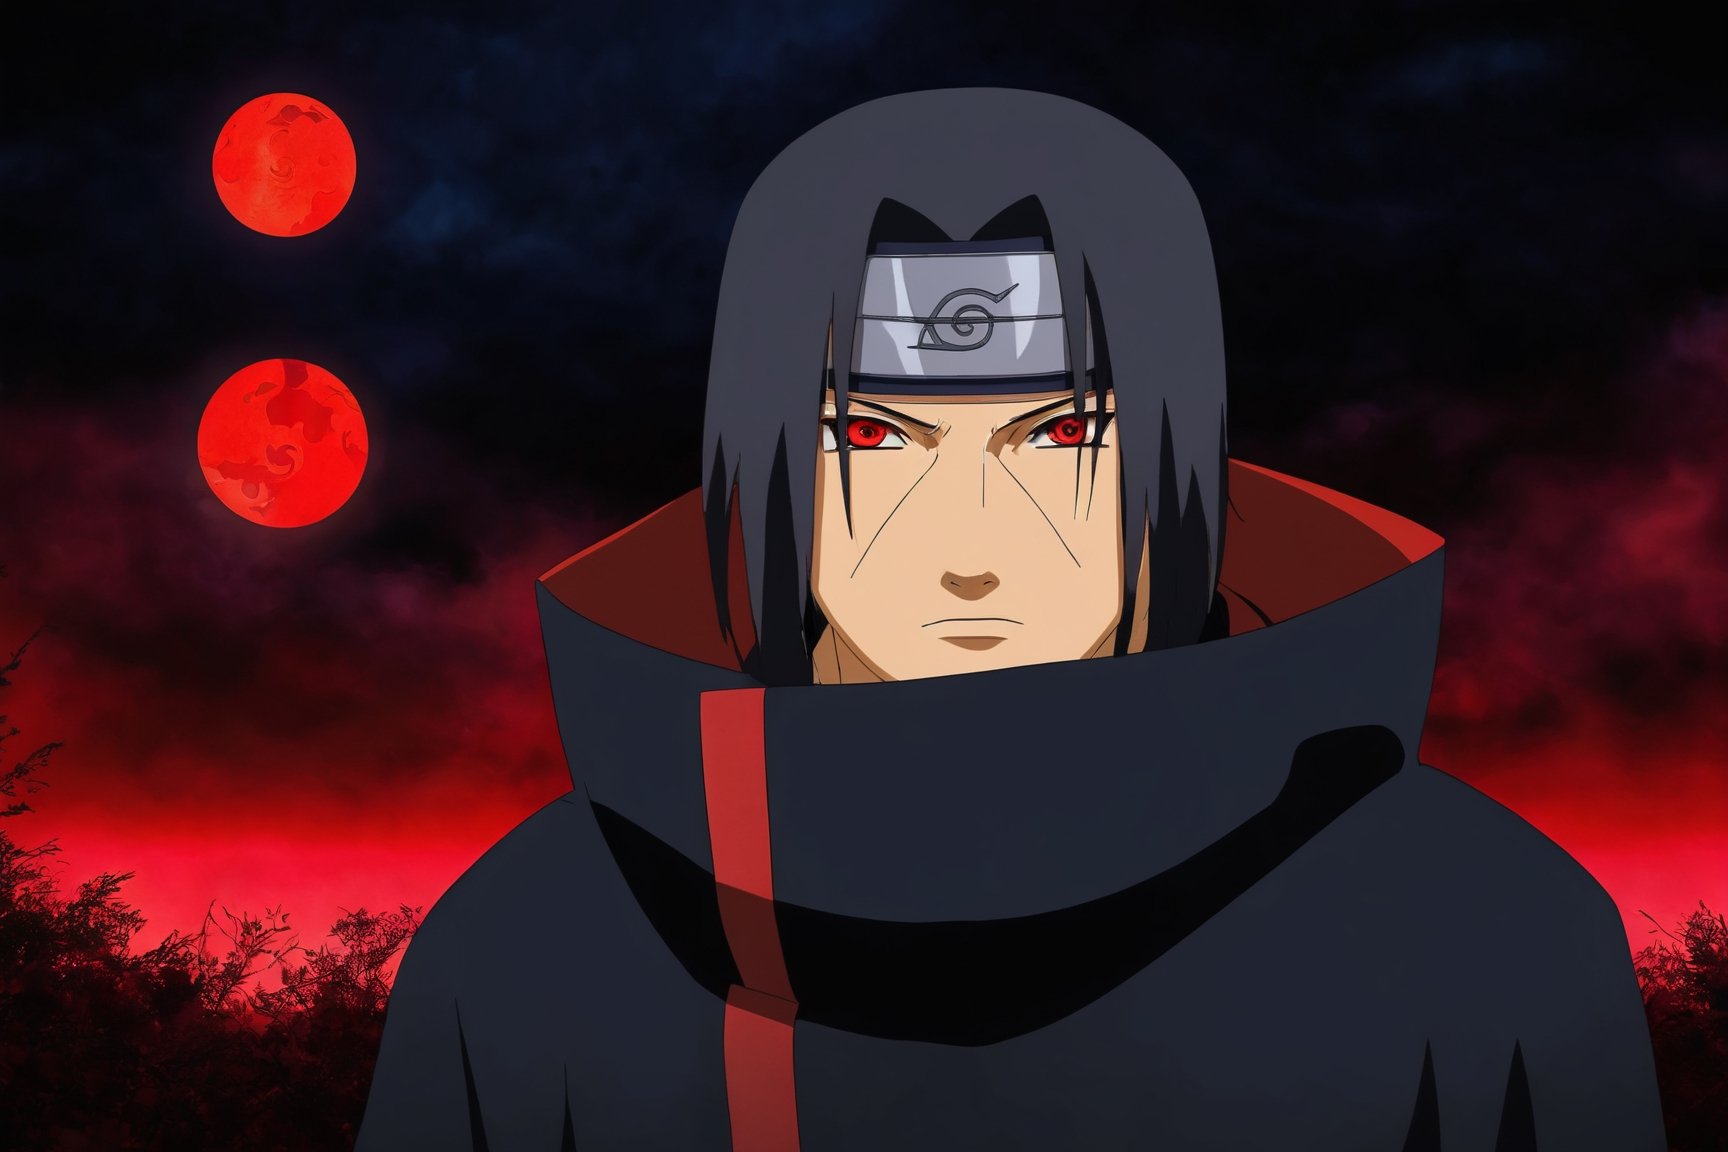 (best quality, 8K, highres, masterpiece), ultra-detailed, close-up portrait of Itachi Uchiha with his Sharingan eyes, set against a dramatic blood moon background. This composition captures Itachi's intense gaze, the Sharingan's detailed complexity, and the eerie, powerful ambiance created by the blood moon. The stark contrast between the deep reds of the moon and the dark hues of Itachi's features enhances the mysterious and formidable essence of his character. The artwork aims to convey Itachi's depth, power, and the haunting beauty of his determination, all while encapsulating the symbolic relationship between the Uchiha clan and the moon's ominous presence